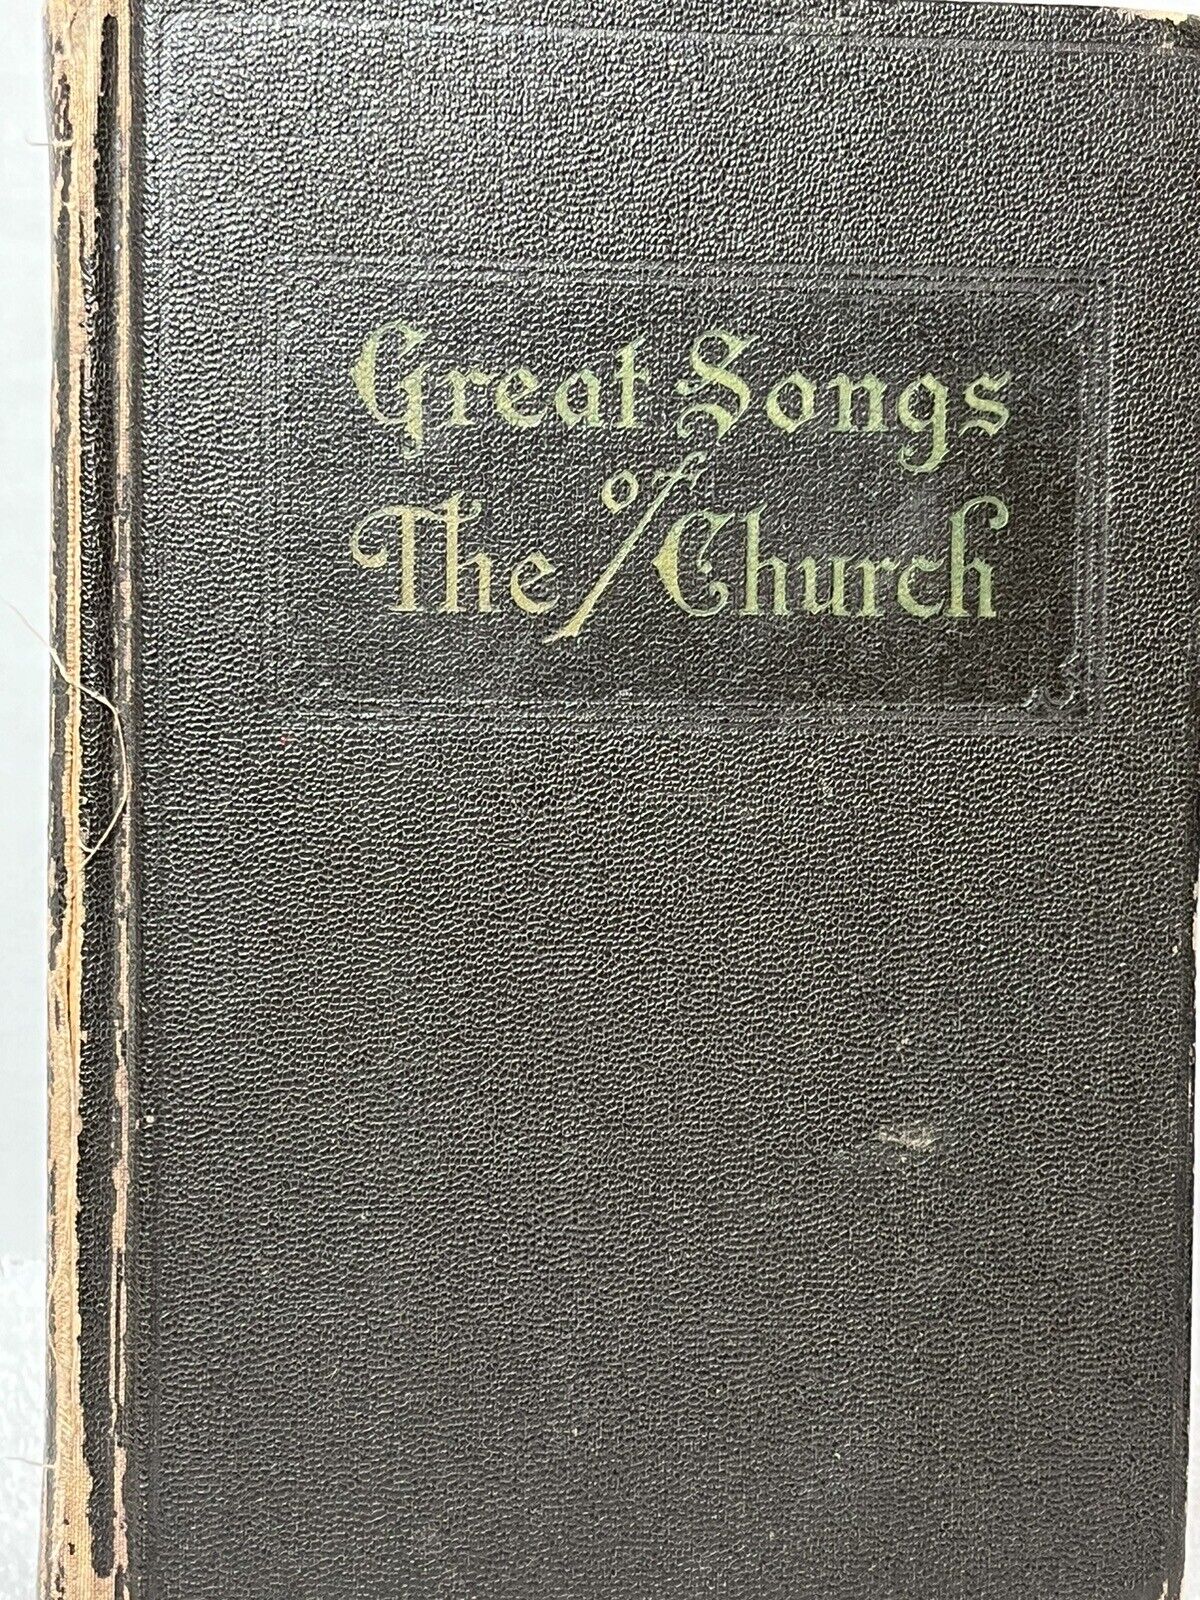 Great Songs Of The Church #2 By E.L. Jorgensen 1928 Hardcover (spine worn)